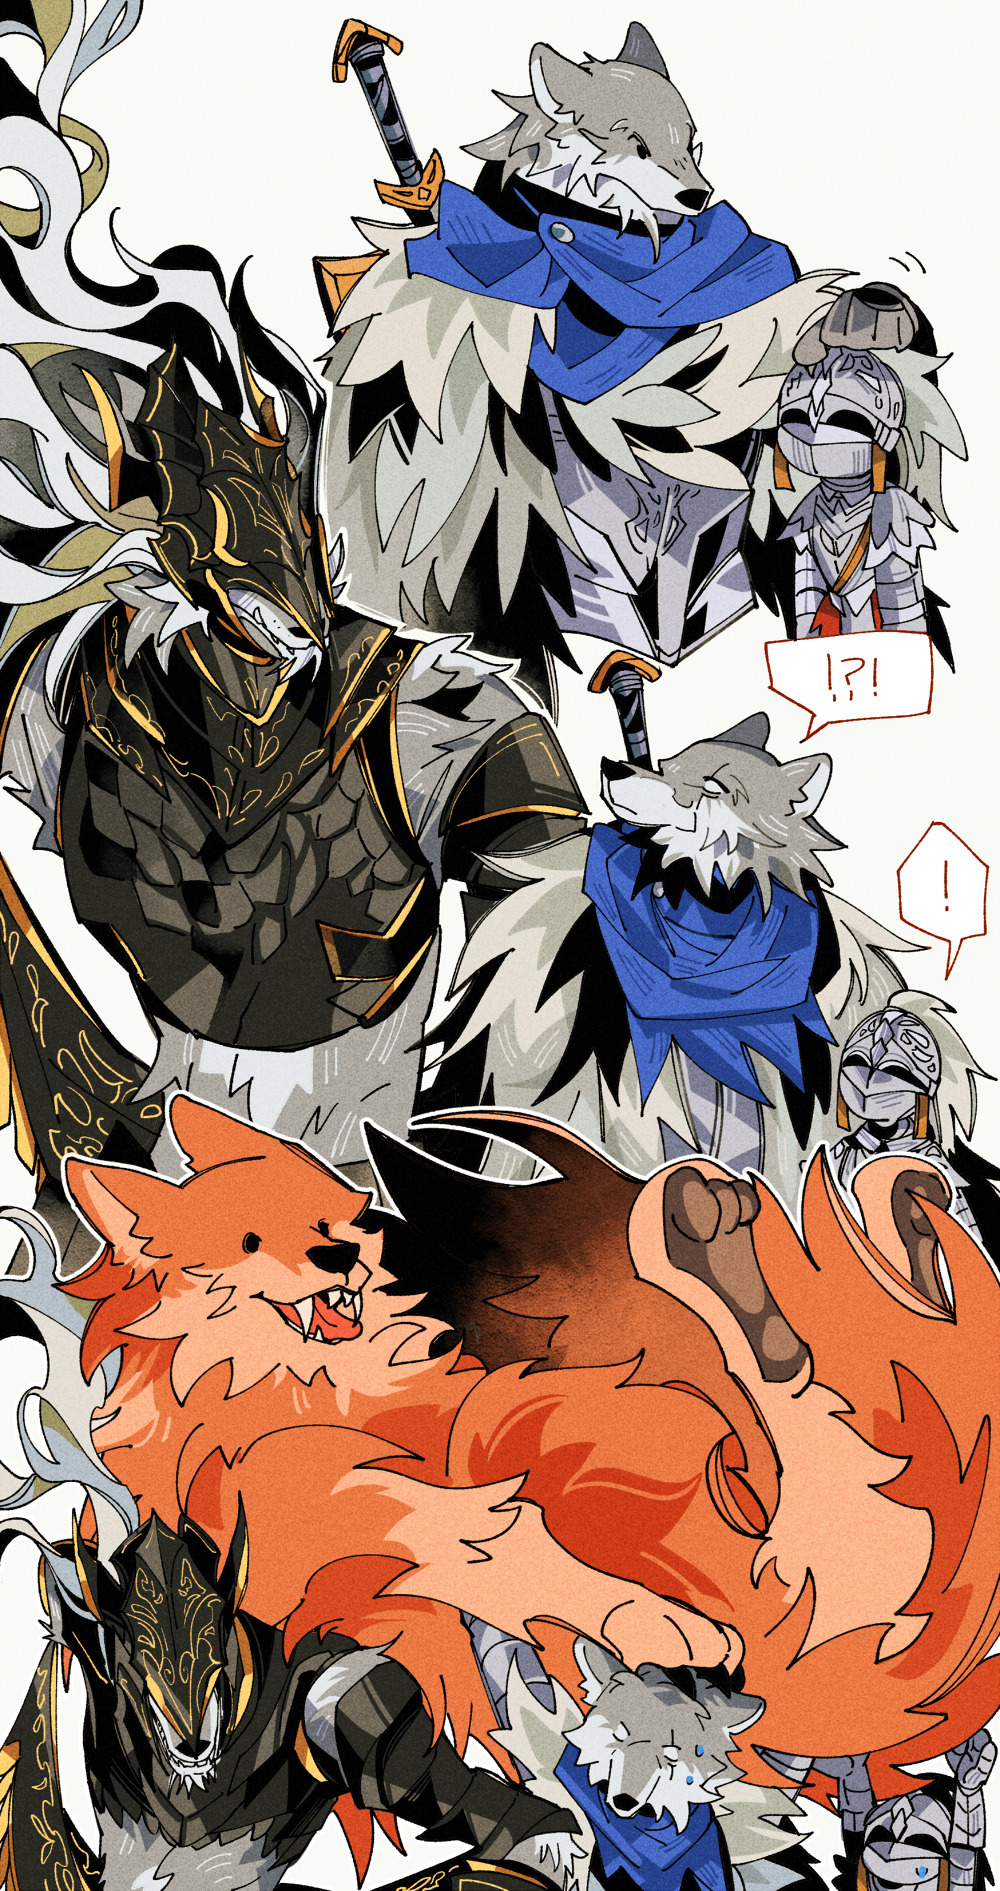 drenched-in-sunlight:
? elden ring wolf gang *applaud* 🐺🧡
?